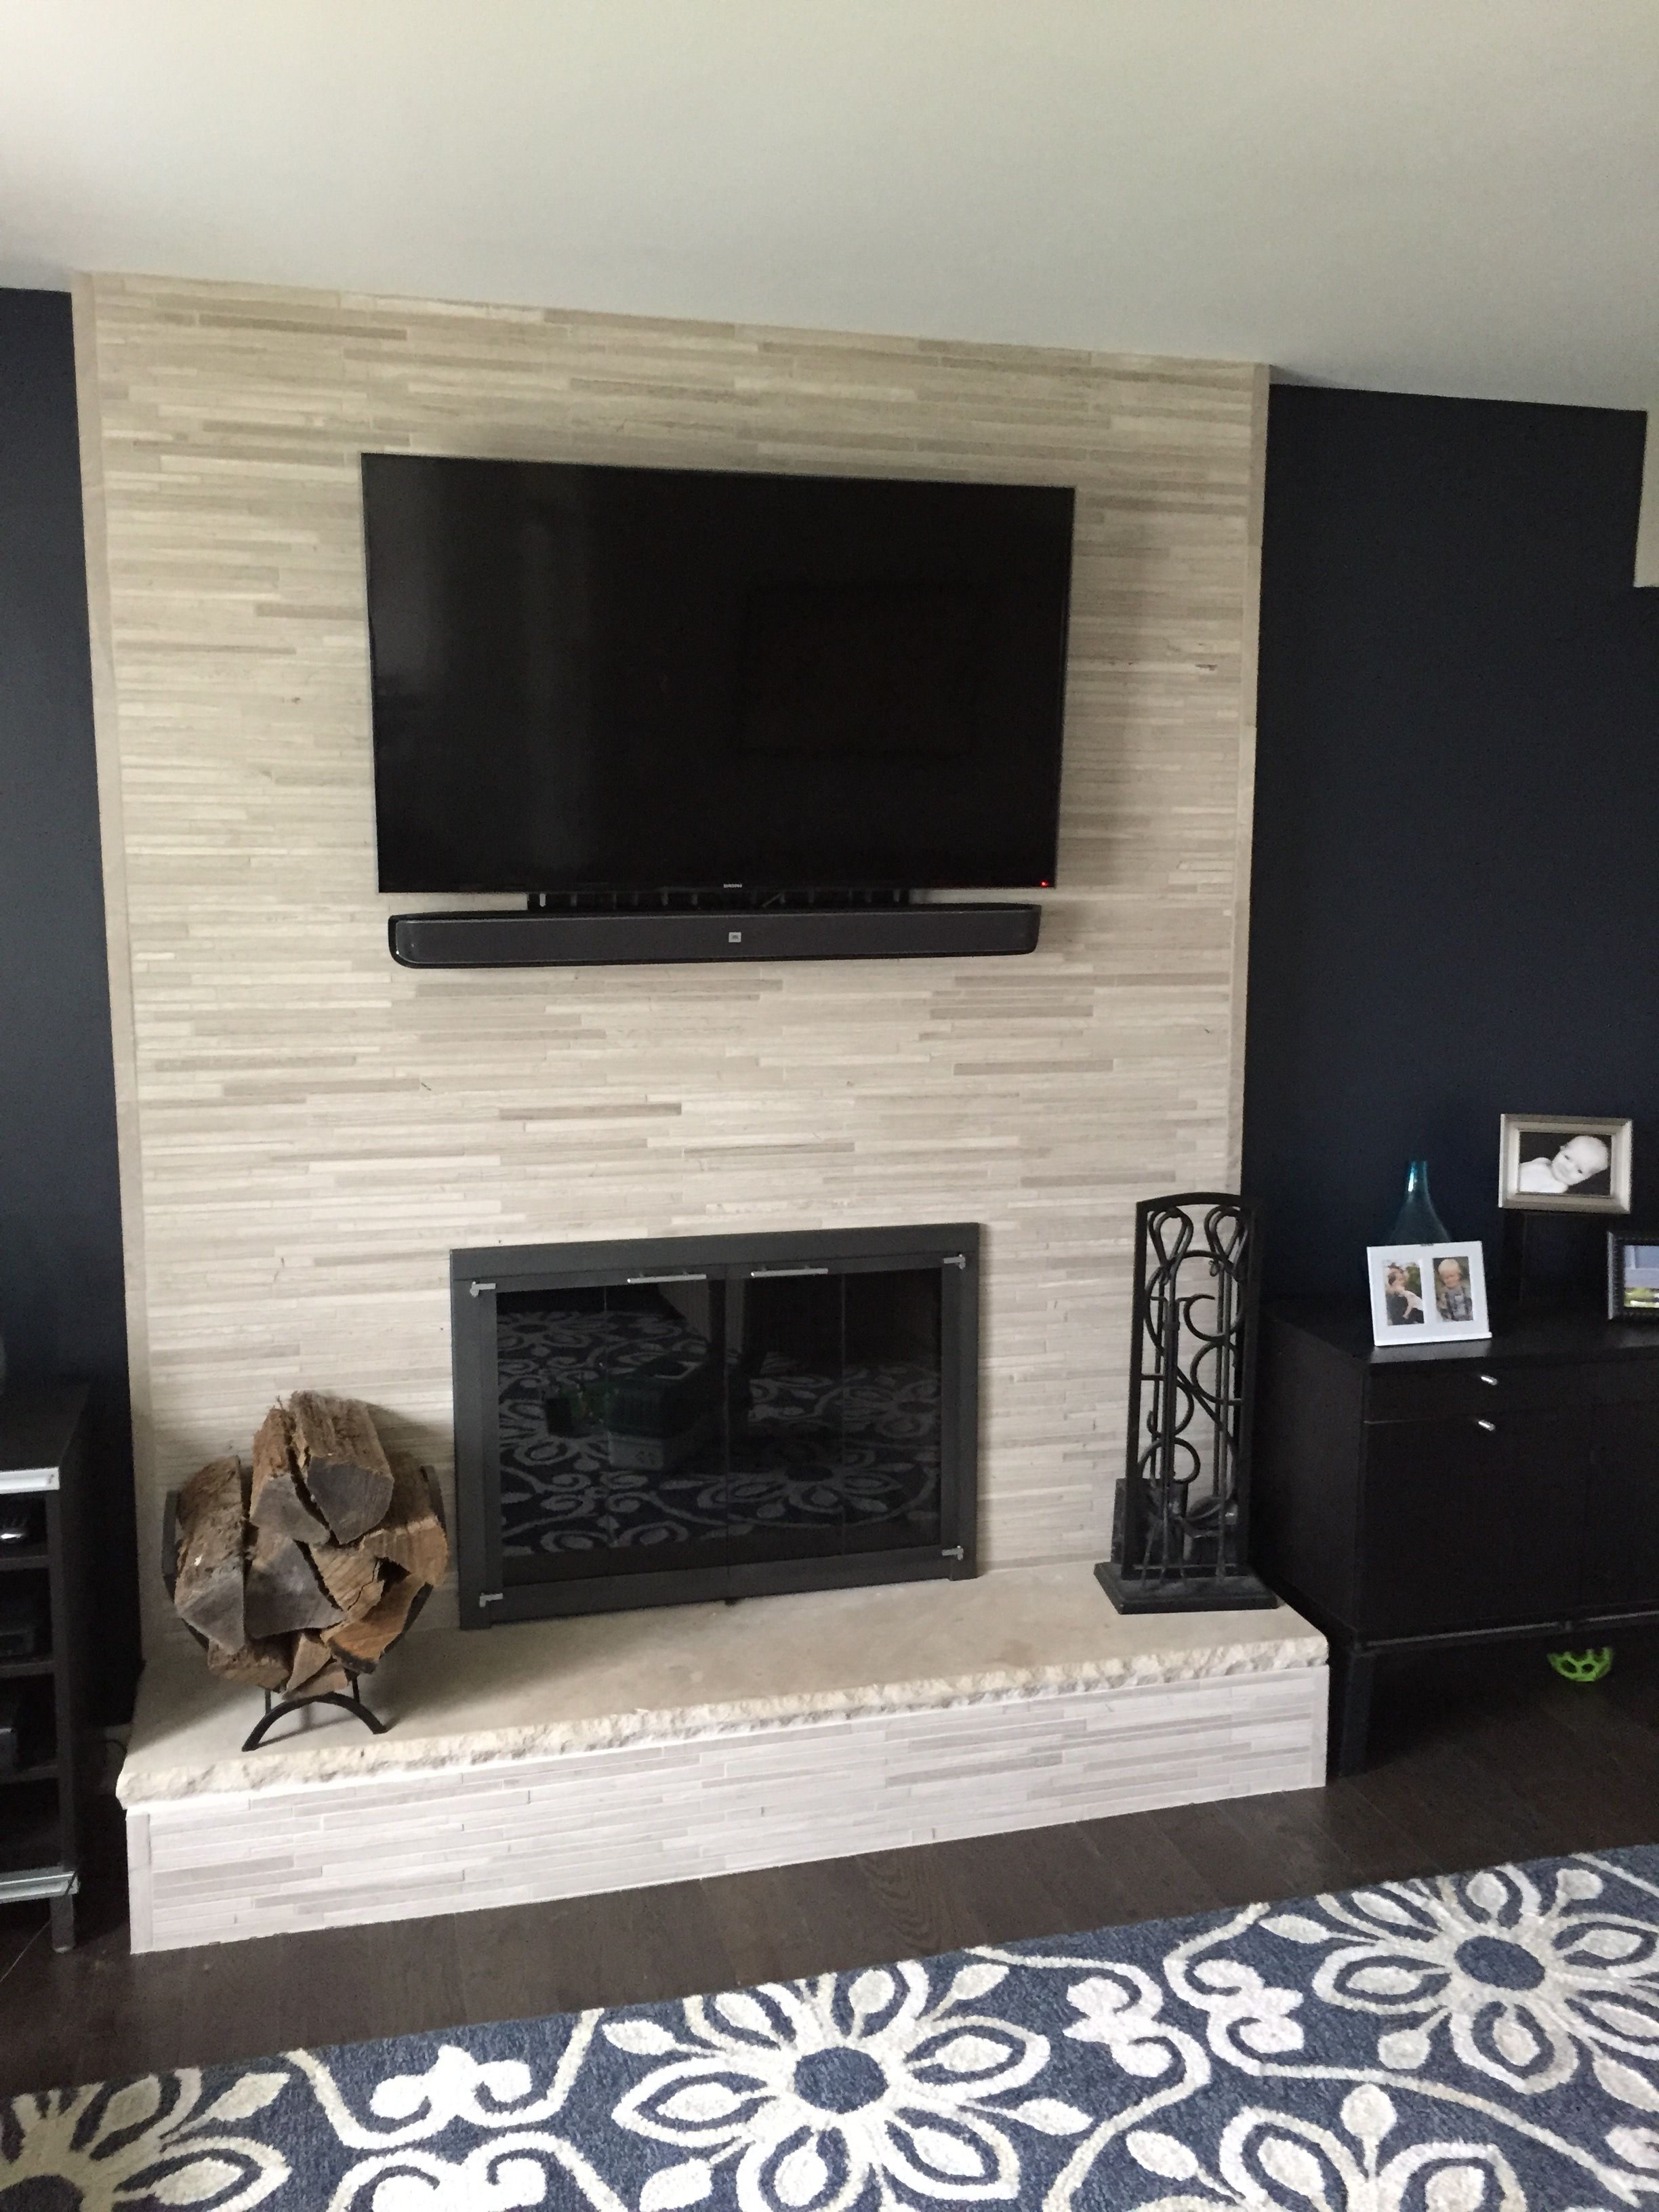 Refacing Fireplace with Stone Awesome Our Old Fireplace Was 80 S 90 S Brick Veneer to Give It An